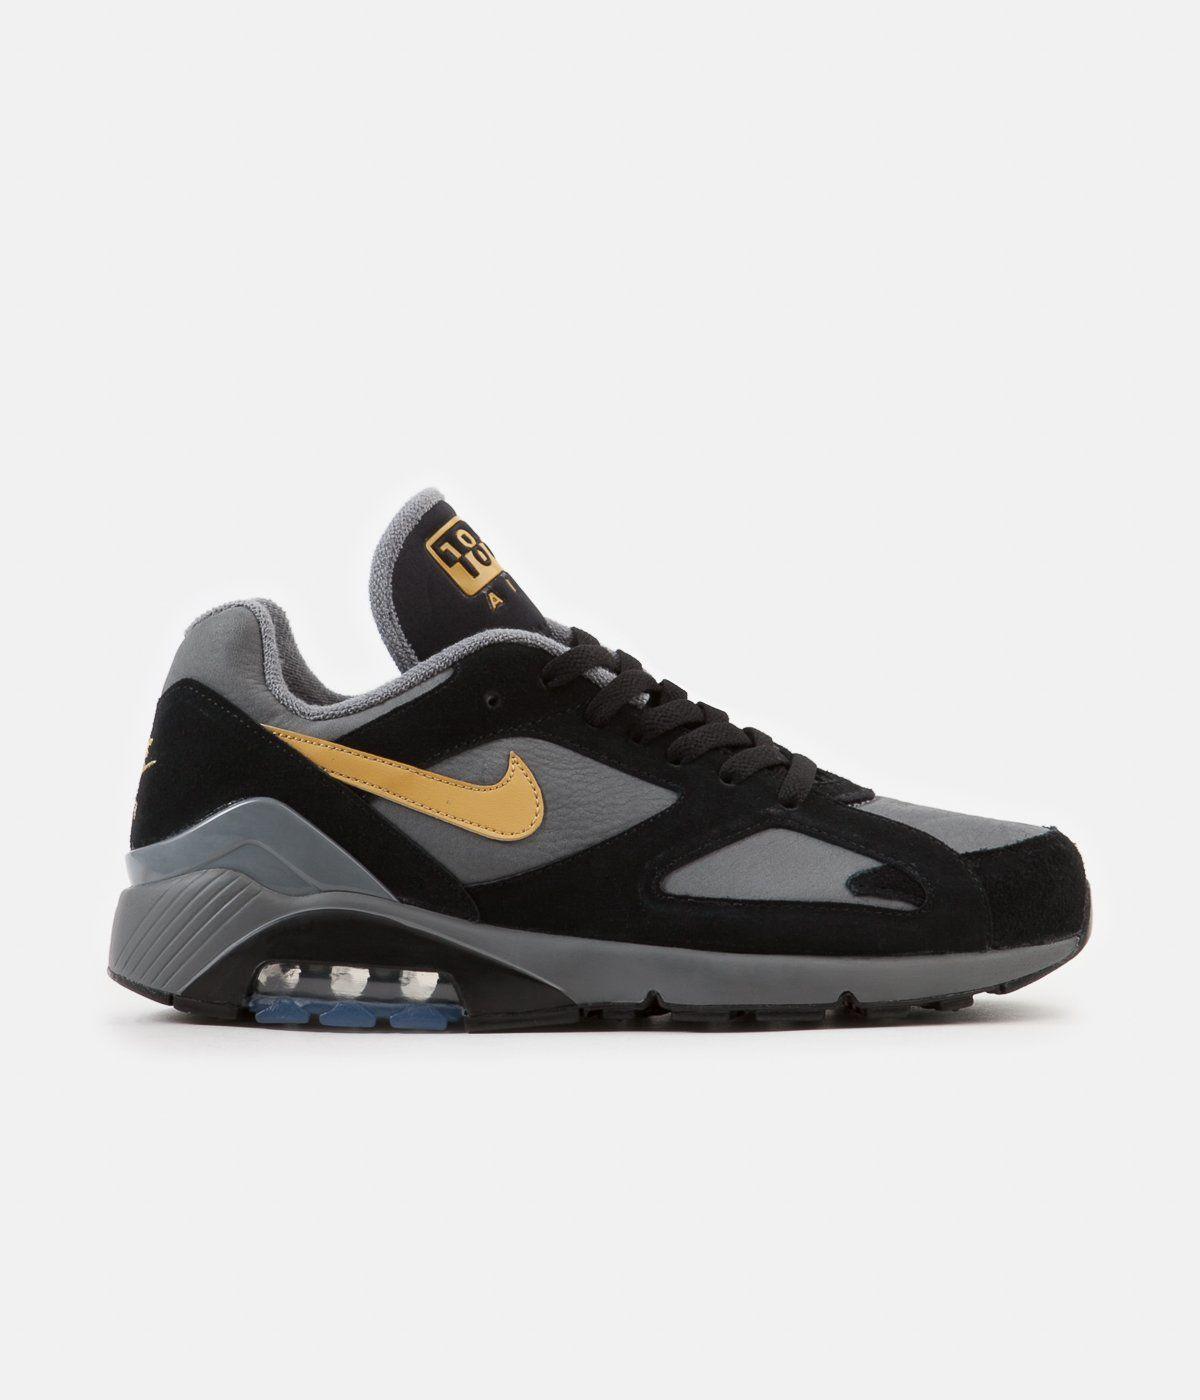 Wheat Black and Gold Logo - Nike Air Max 180 Shoes - Cool Grey / Wheat Gold - Black | Always in ...